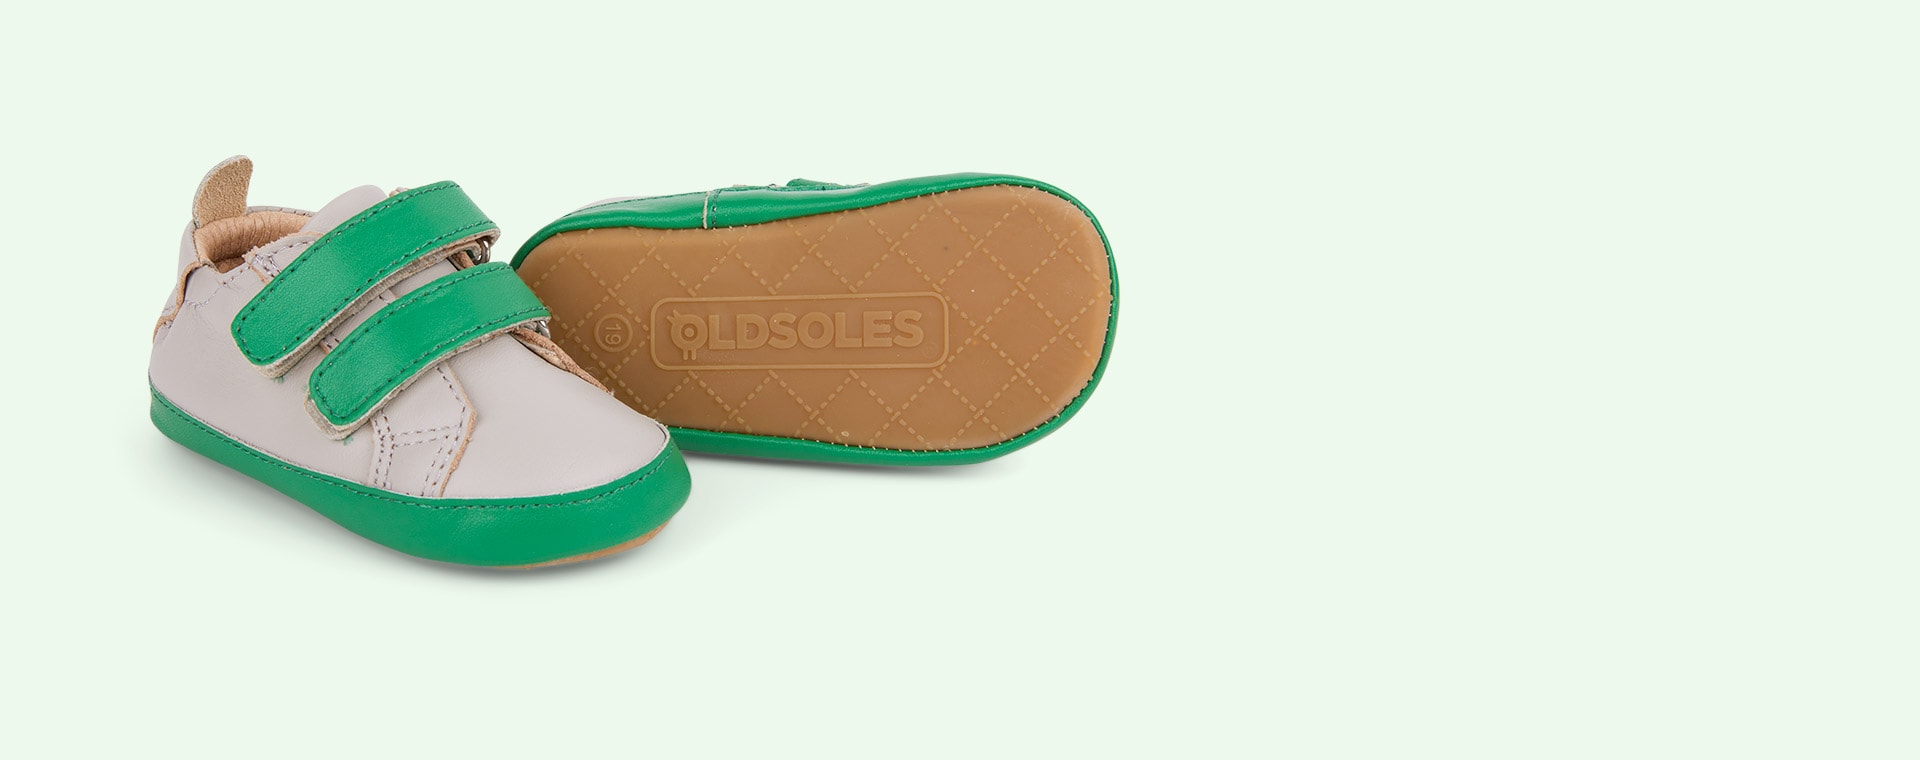 Gris / Neon Green old soles Eazy Market Soft sole Trainer